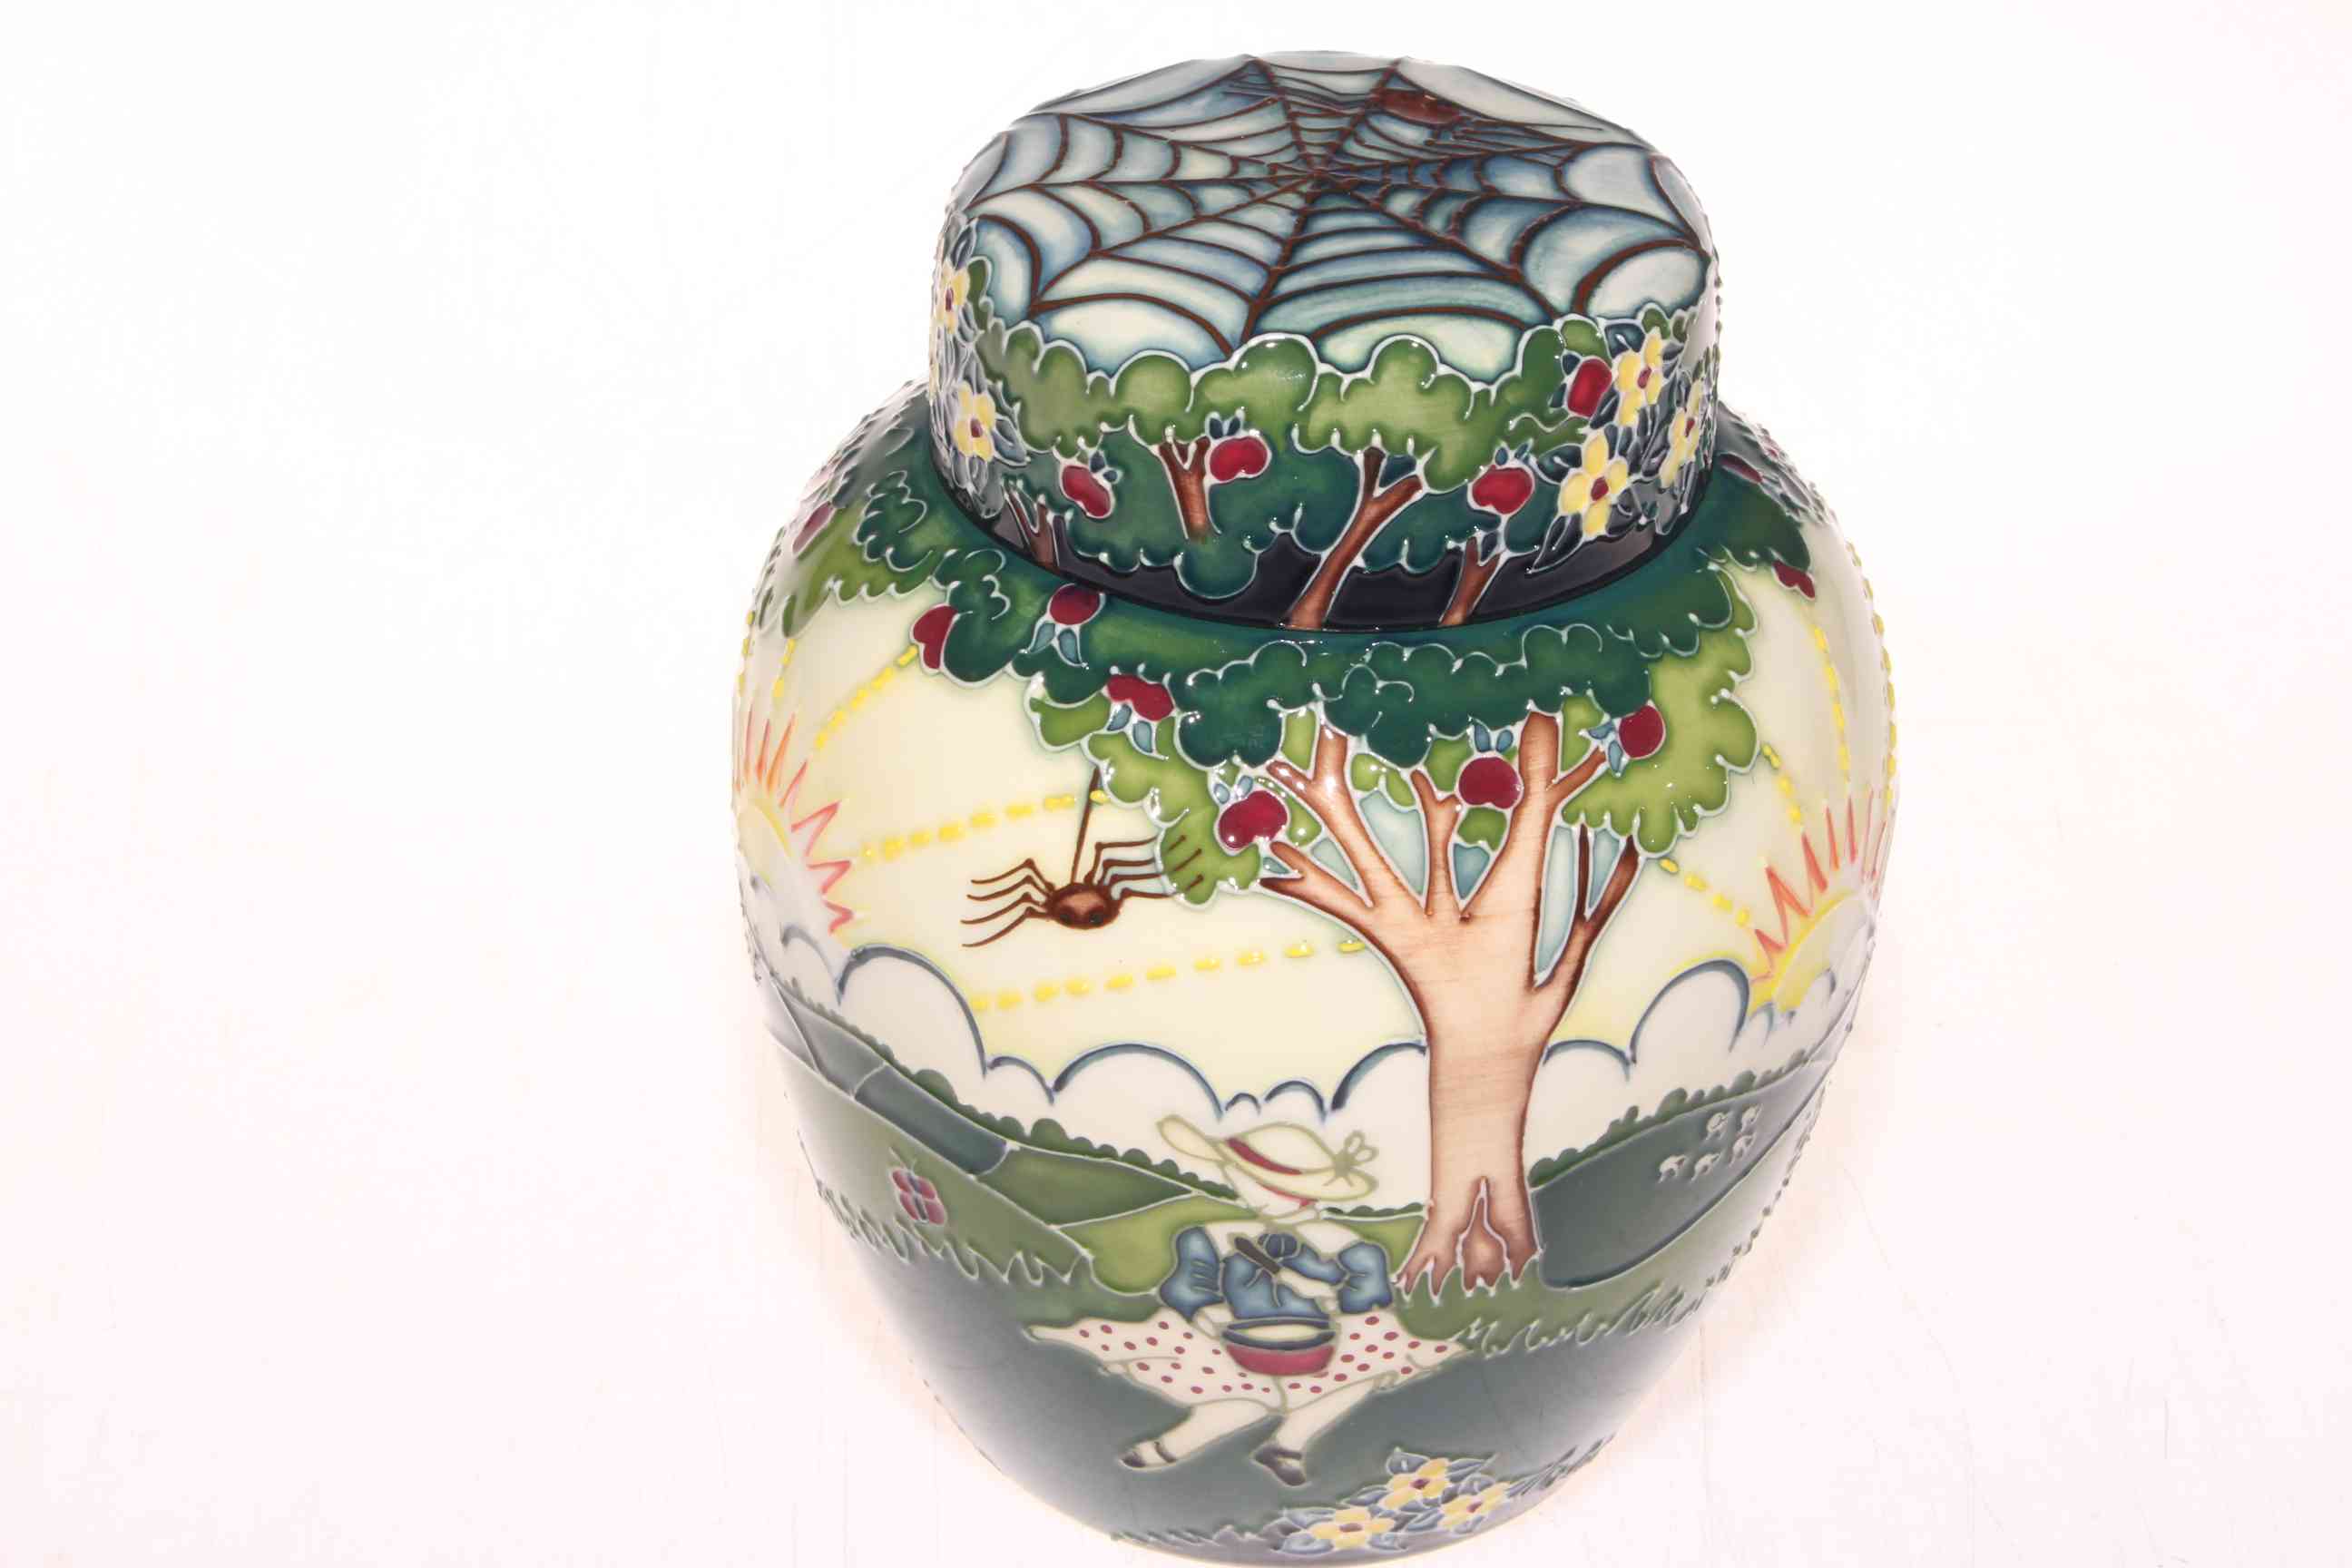 Moorcroft limited edition Little Miss Muffet ginger jar by Nichola Slaney, 177/250, 15cm, with box.